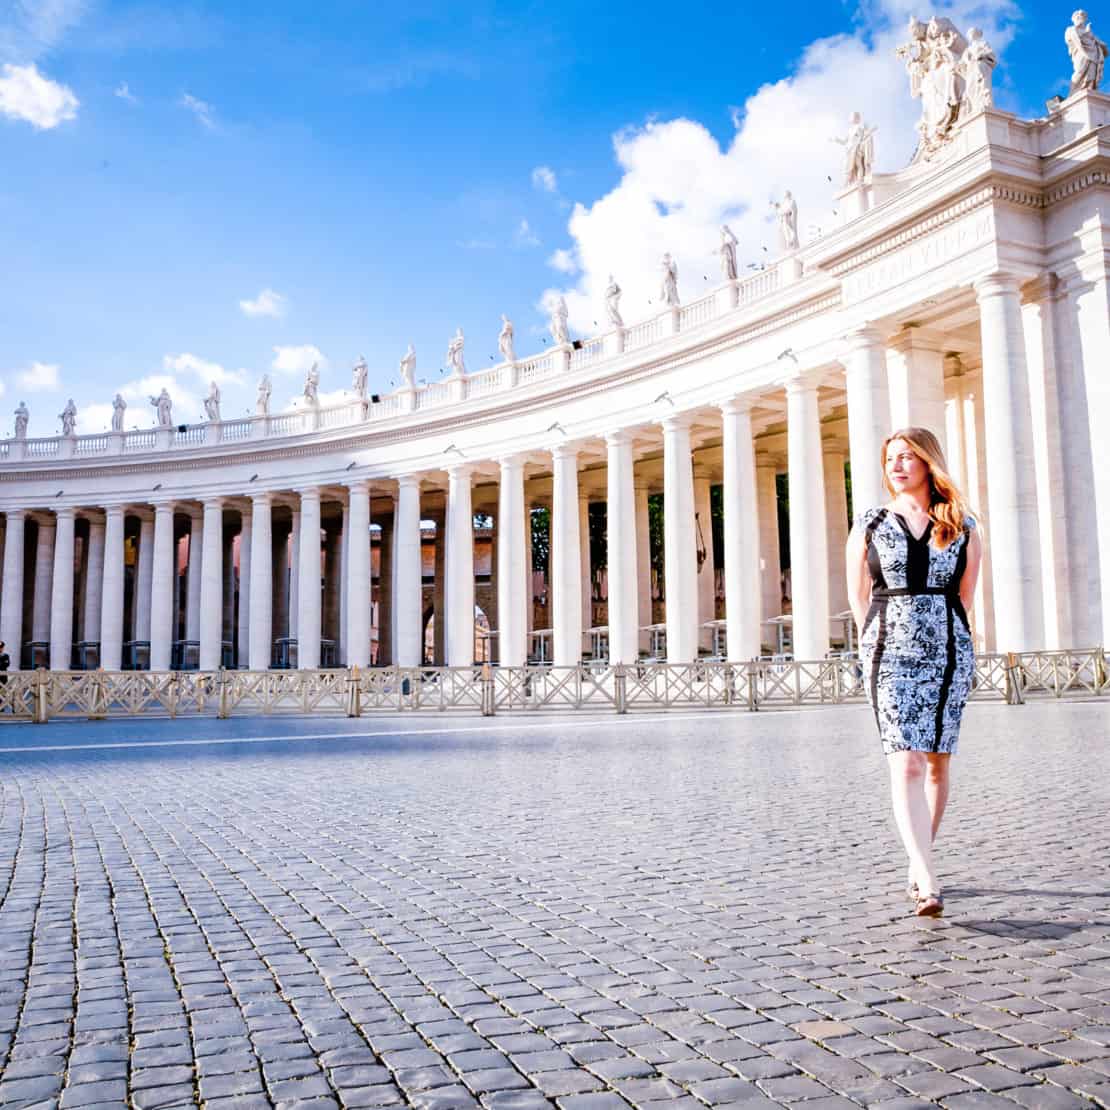 Italy - Rome- Abigail King walking outside the Vatican